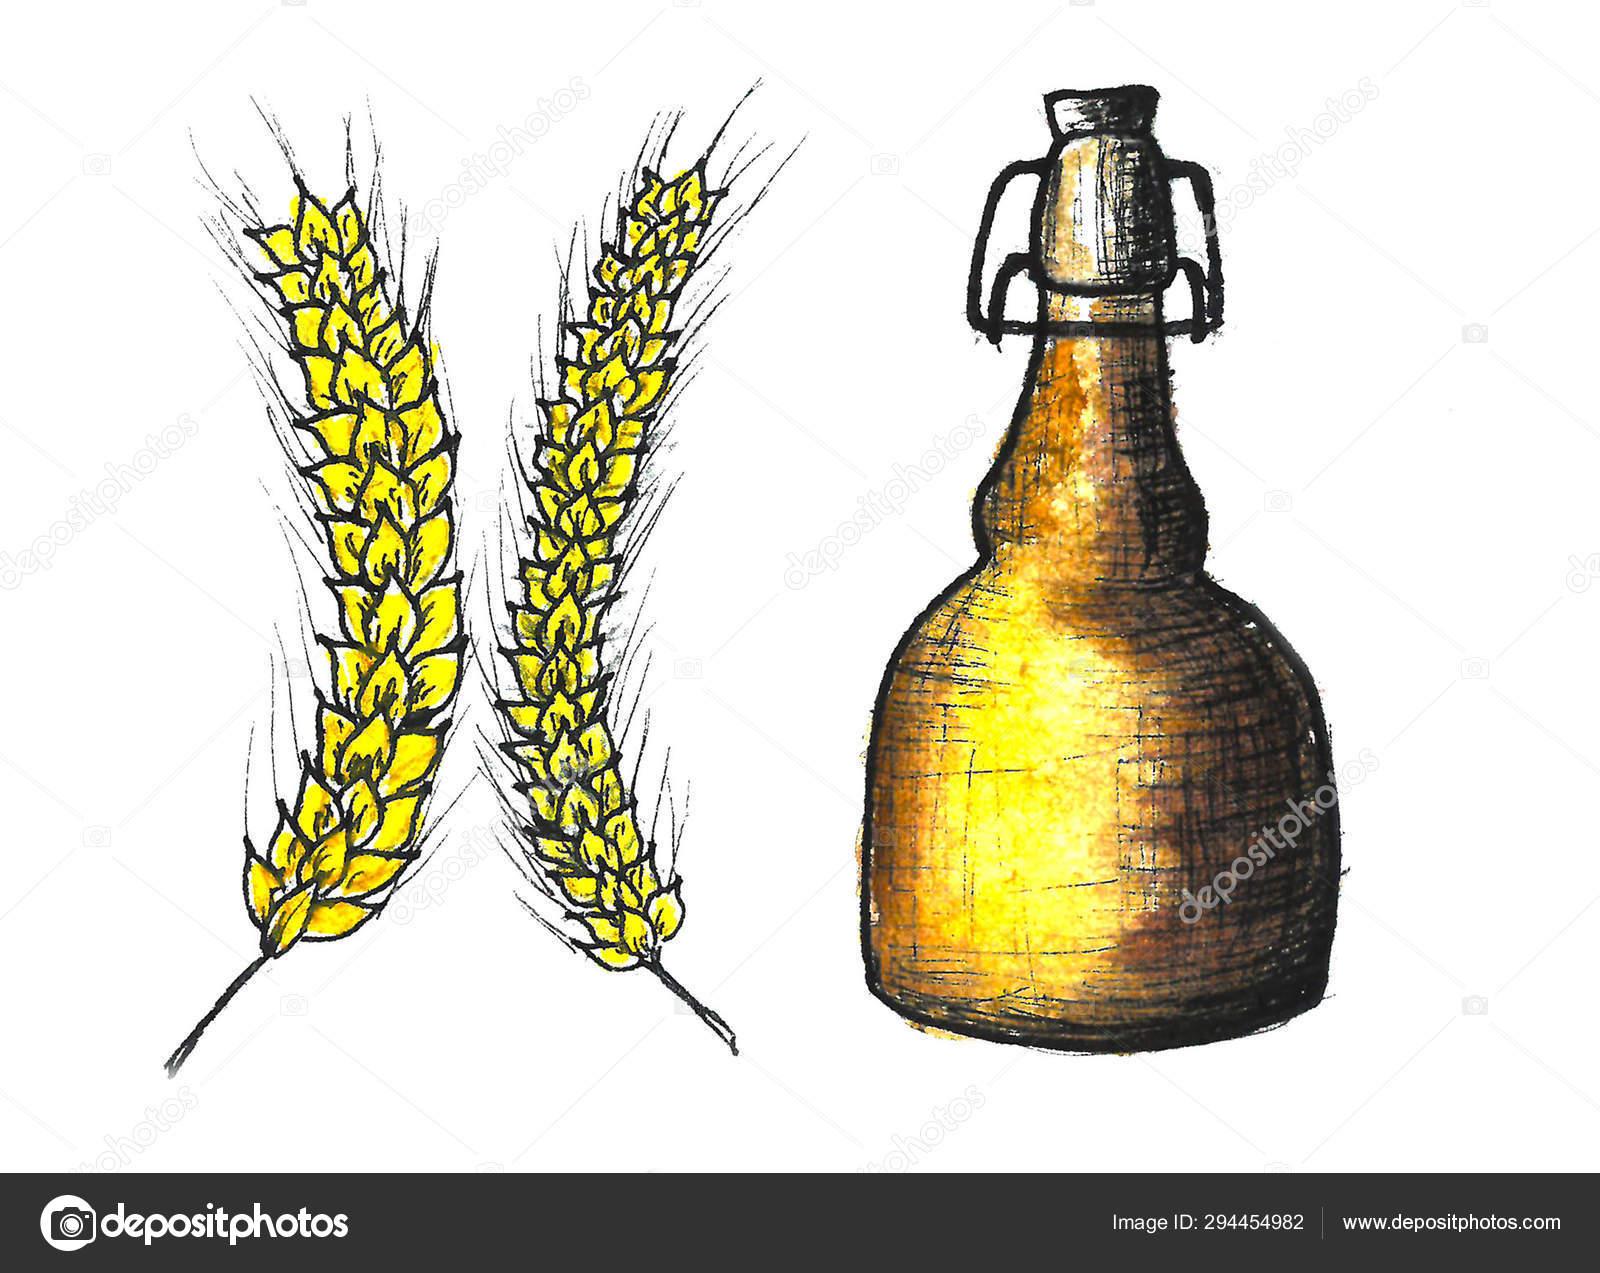 Download Beautiful Stylized Picture Yellow Wheat And Beer Bottle Watercolor Drawing Stock Photo C Alarina Art 294454982 Yellowimages Mockups